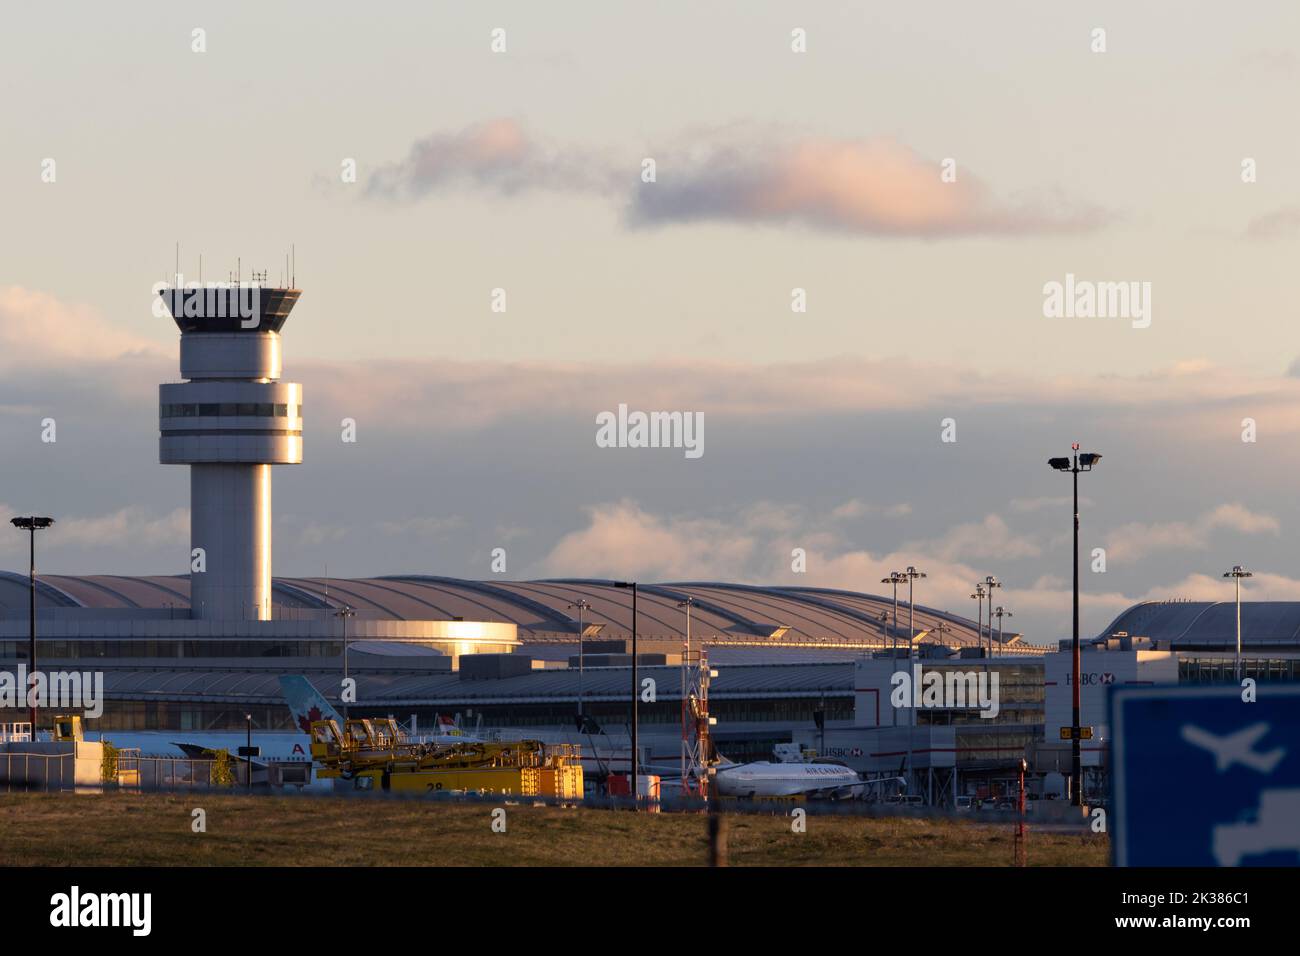 Toronto Pearson Intl. Airport Terminal 1 is seen in the early morning from across the airfield, seen while some Air Canada aircraft are at gates. Stock Photo